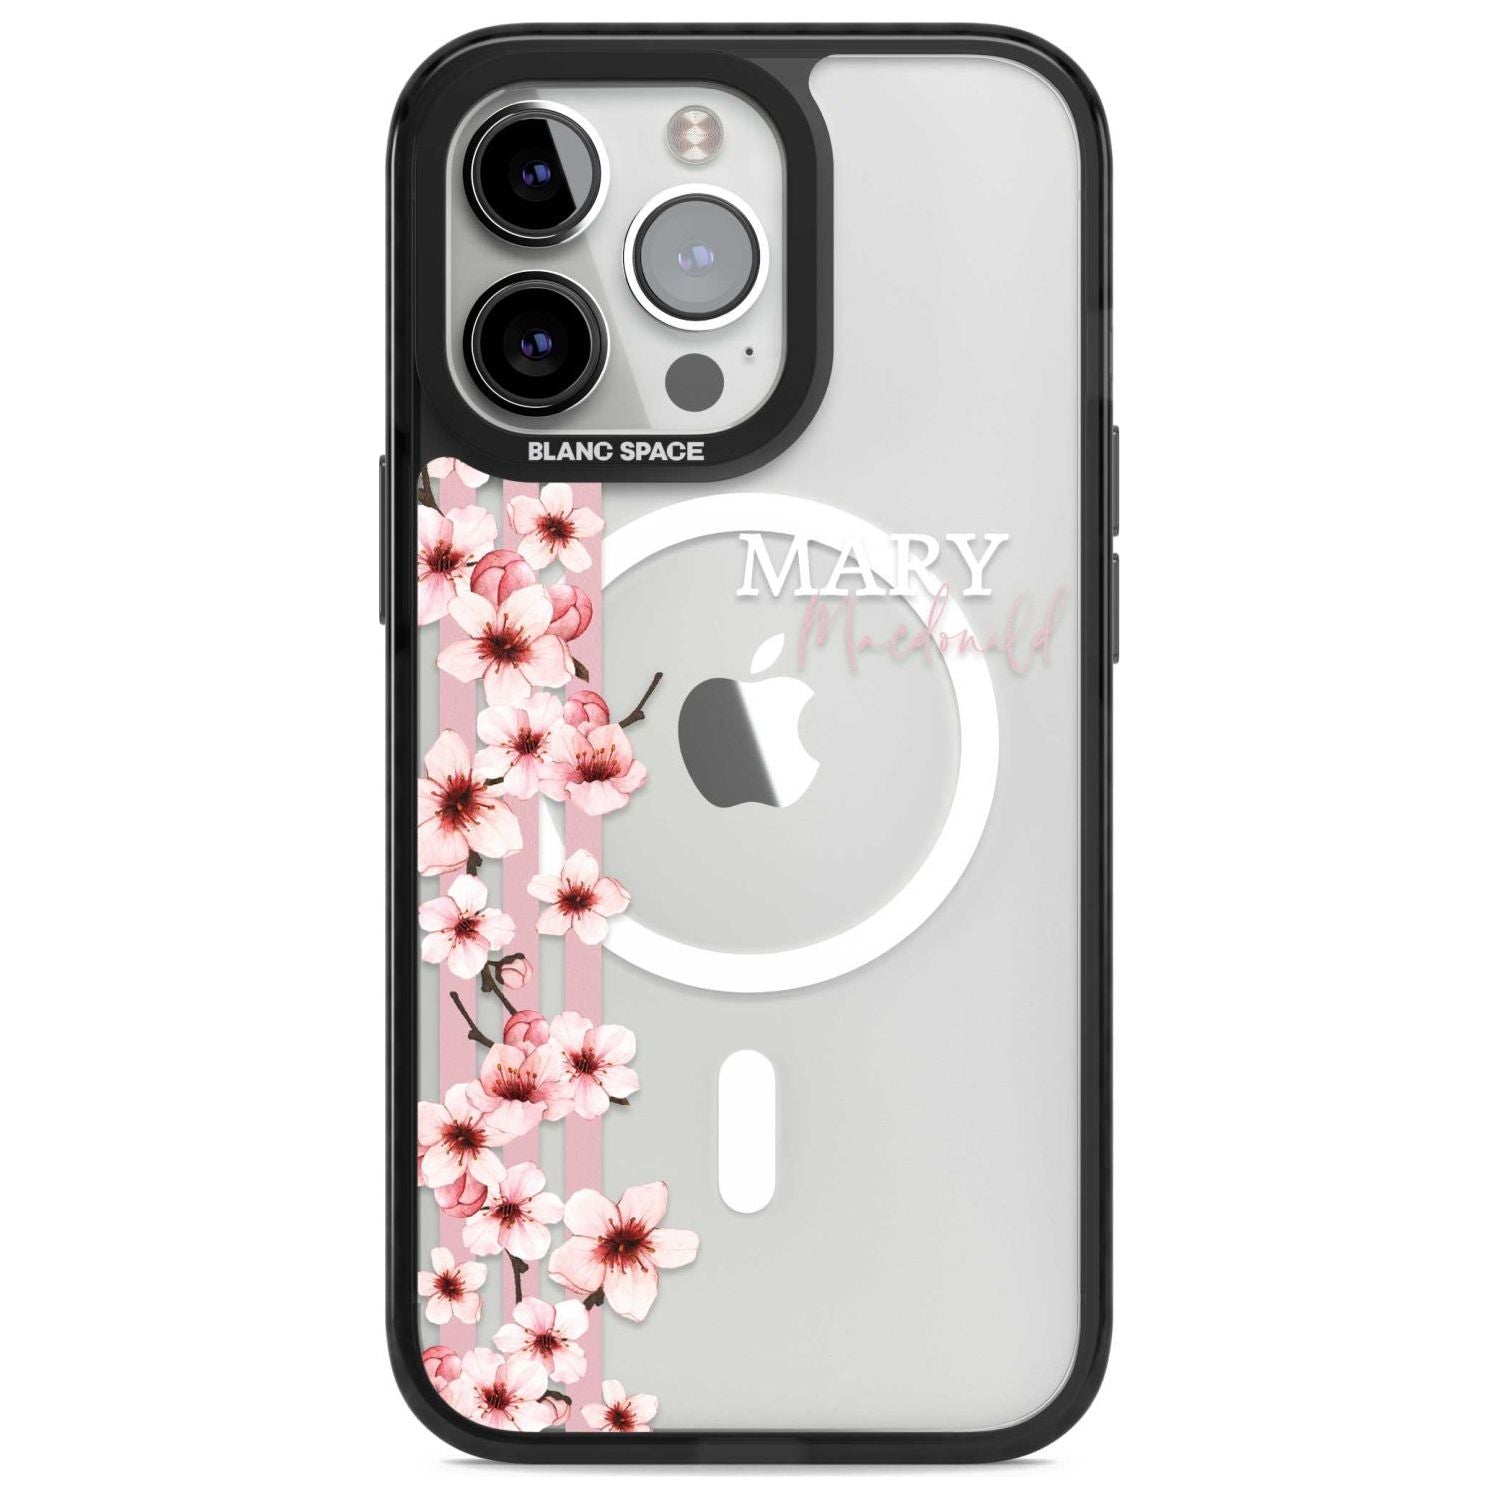 Personalised Cherry Blossoms & Stripes Custom Phone Case iPhone 15 Pro Max / Magsafe Black Impact Case,iPhone 15 Pro / Magsafe Black Impact Case,iPhone 14 Pro Max / Magsafe Black Impact Case,iPhone 14 Pro / Magsafe Black Impact Case,iPhone 13 Pro / Magsafe Black Impact Case Blanc Space